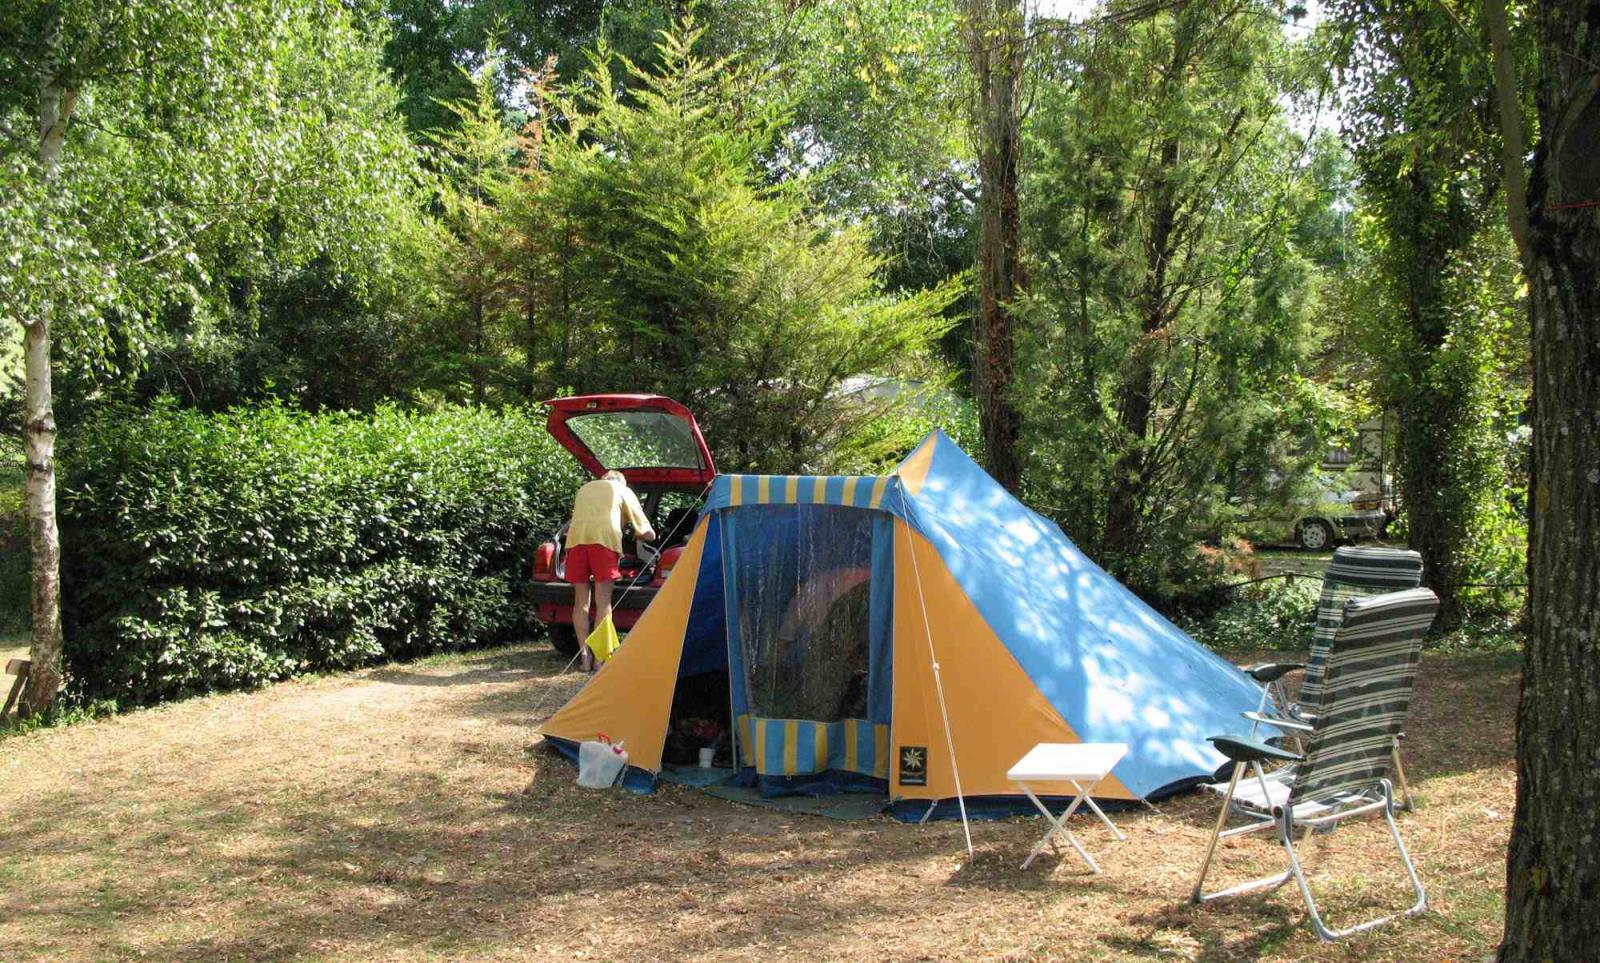 Pitch - Confort Package 2 Adults (1 Tent, Caravan Or Motorhome / 1 Car, Electricity 6A) - Camping la Poche